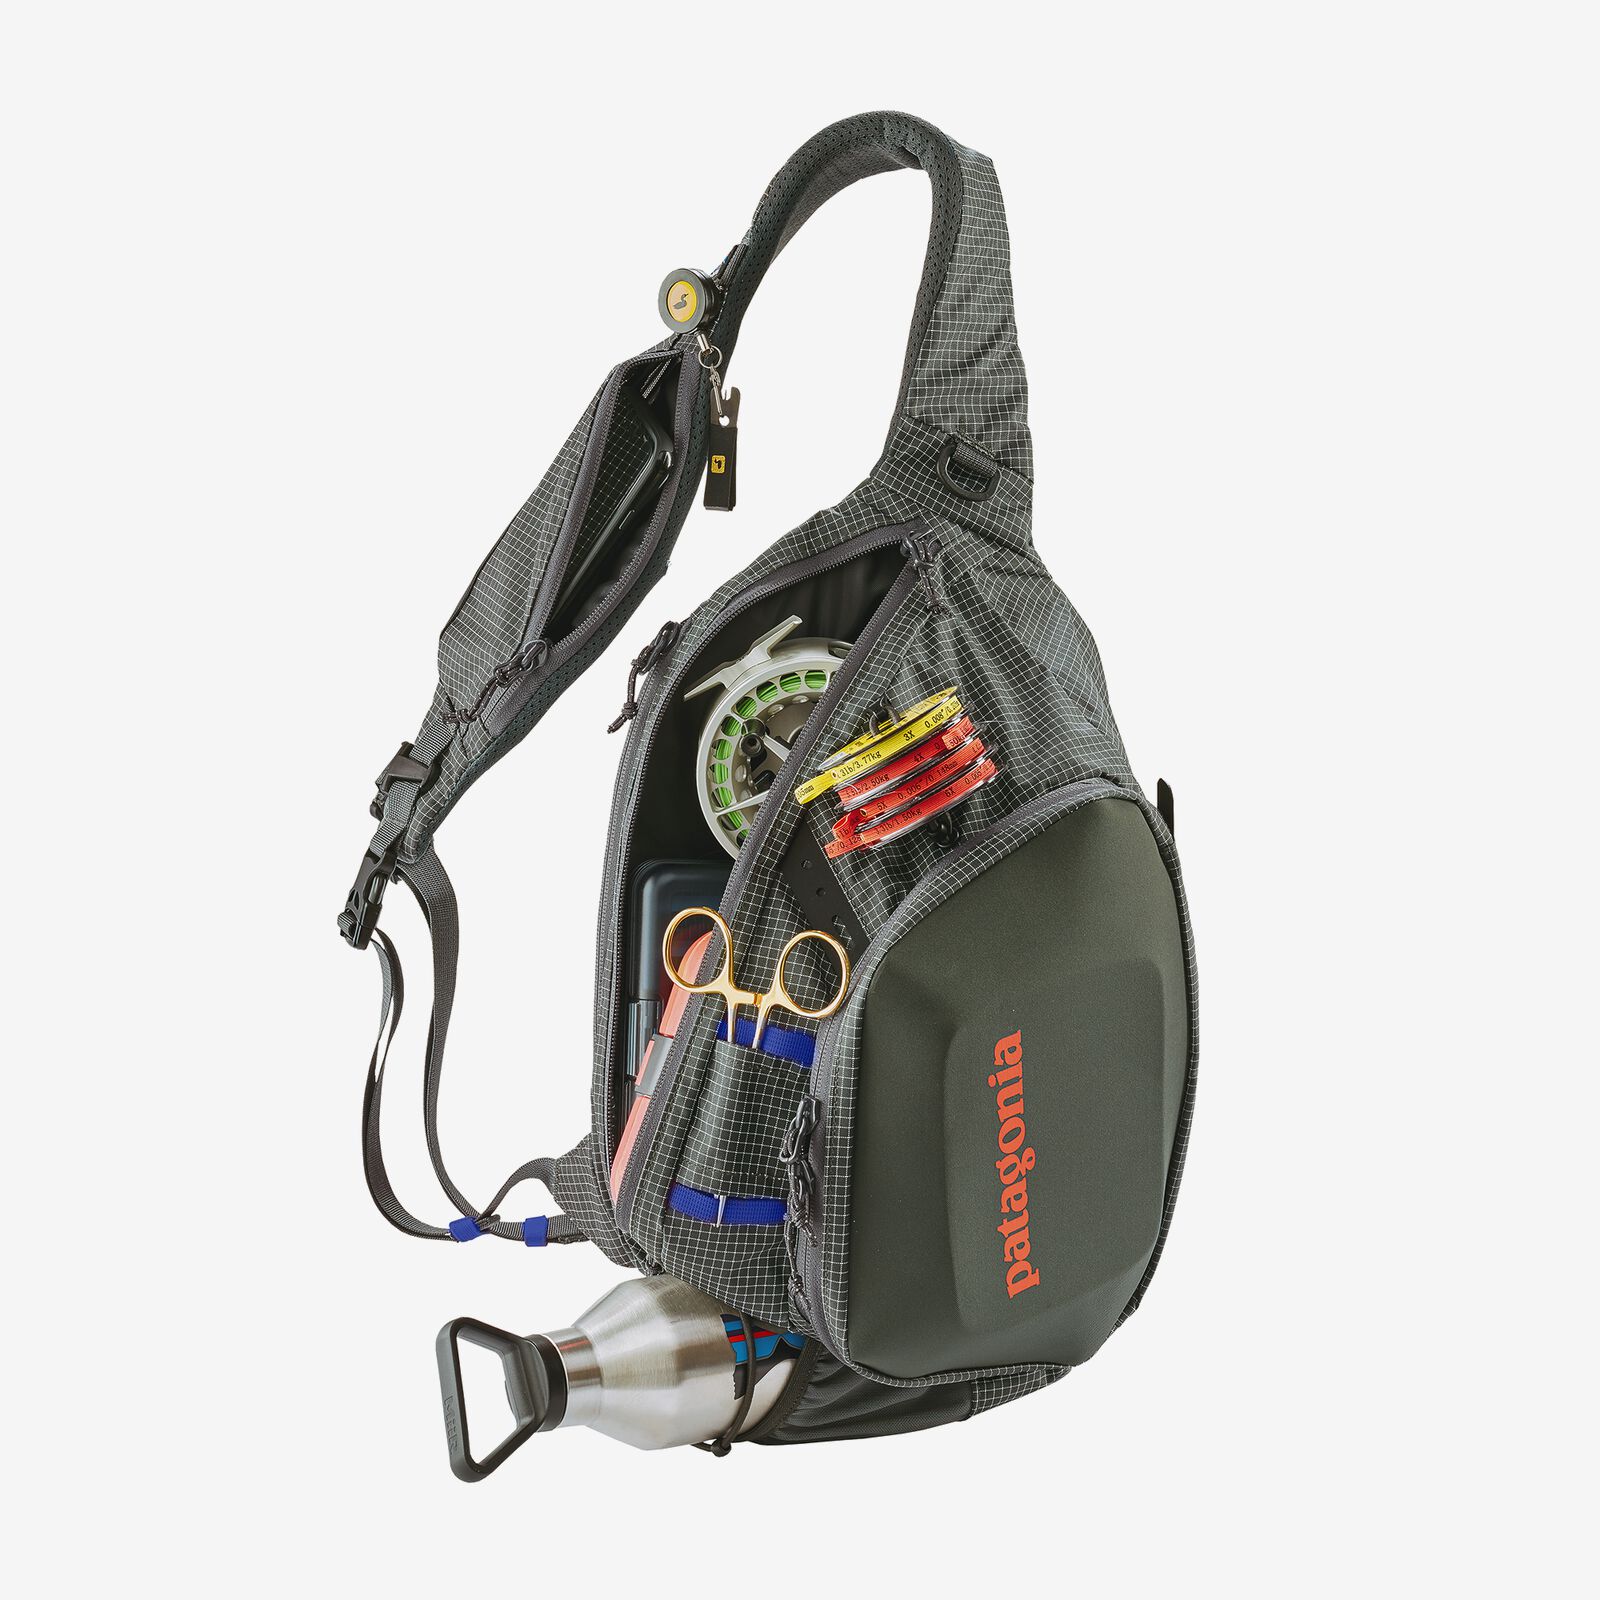 Patagonia Stealth Atom Fly Fishing Sling Pack 8L